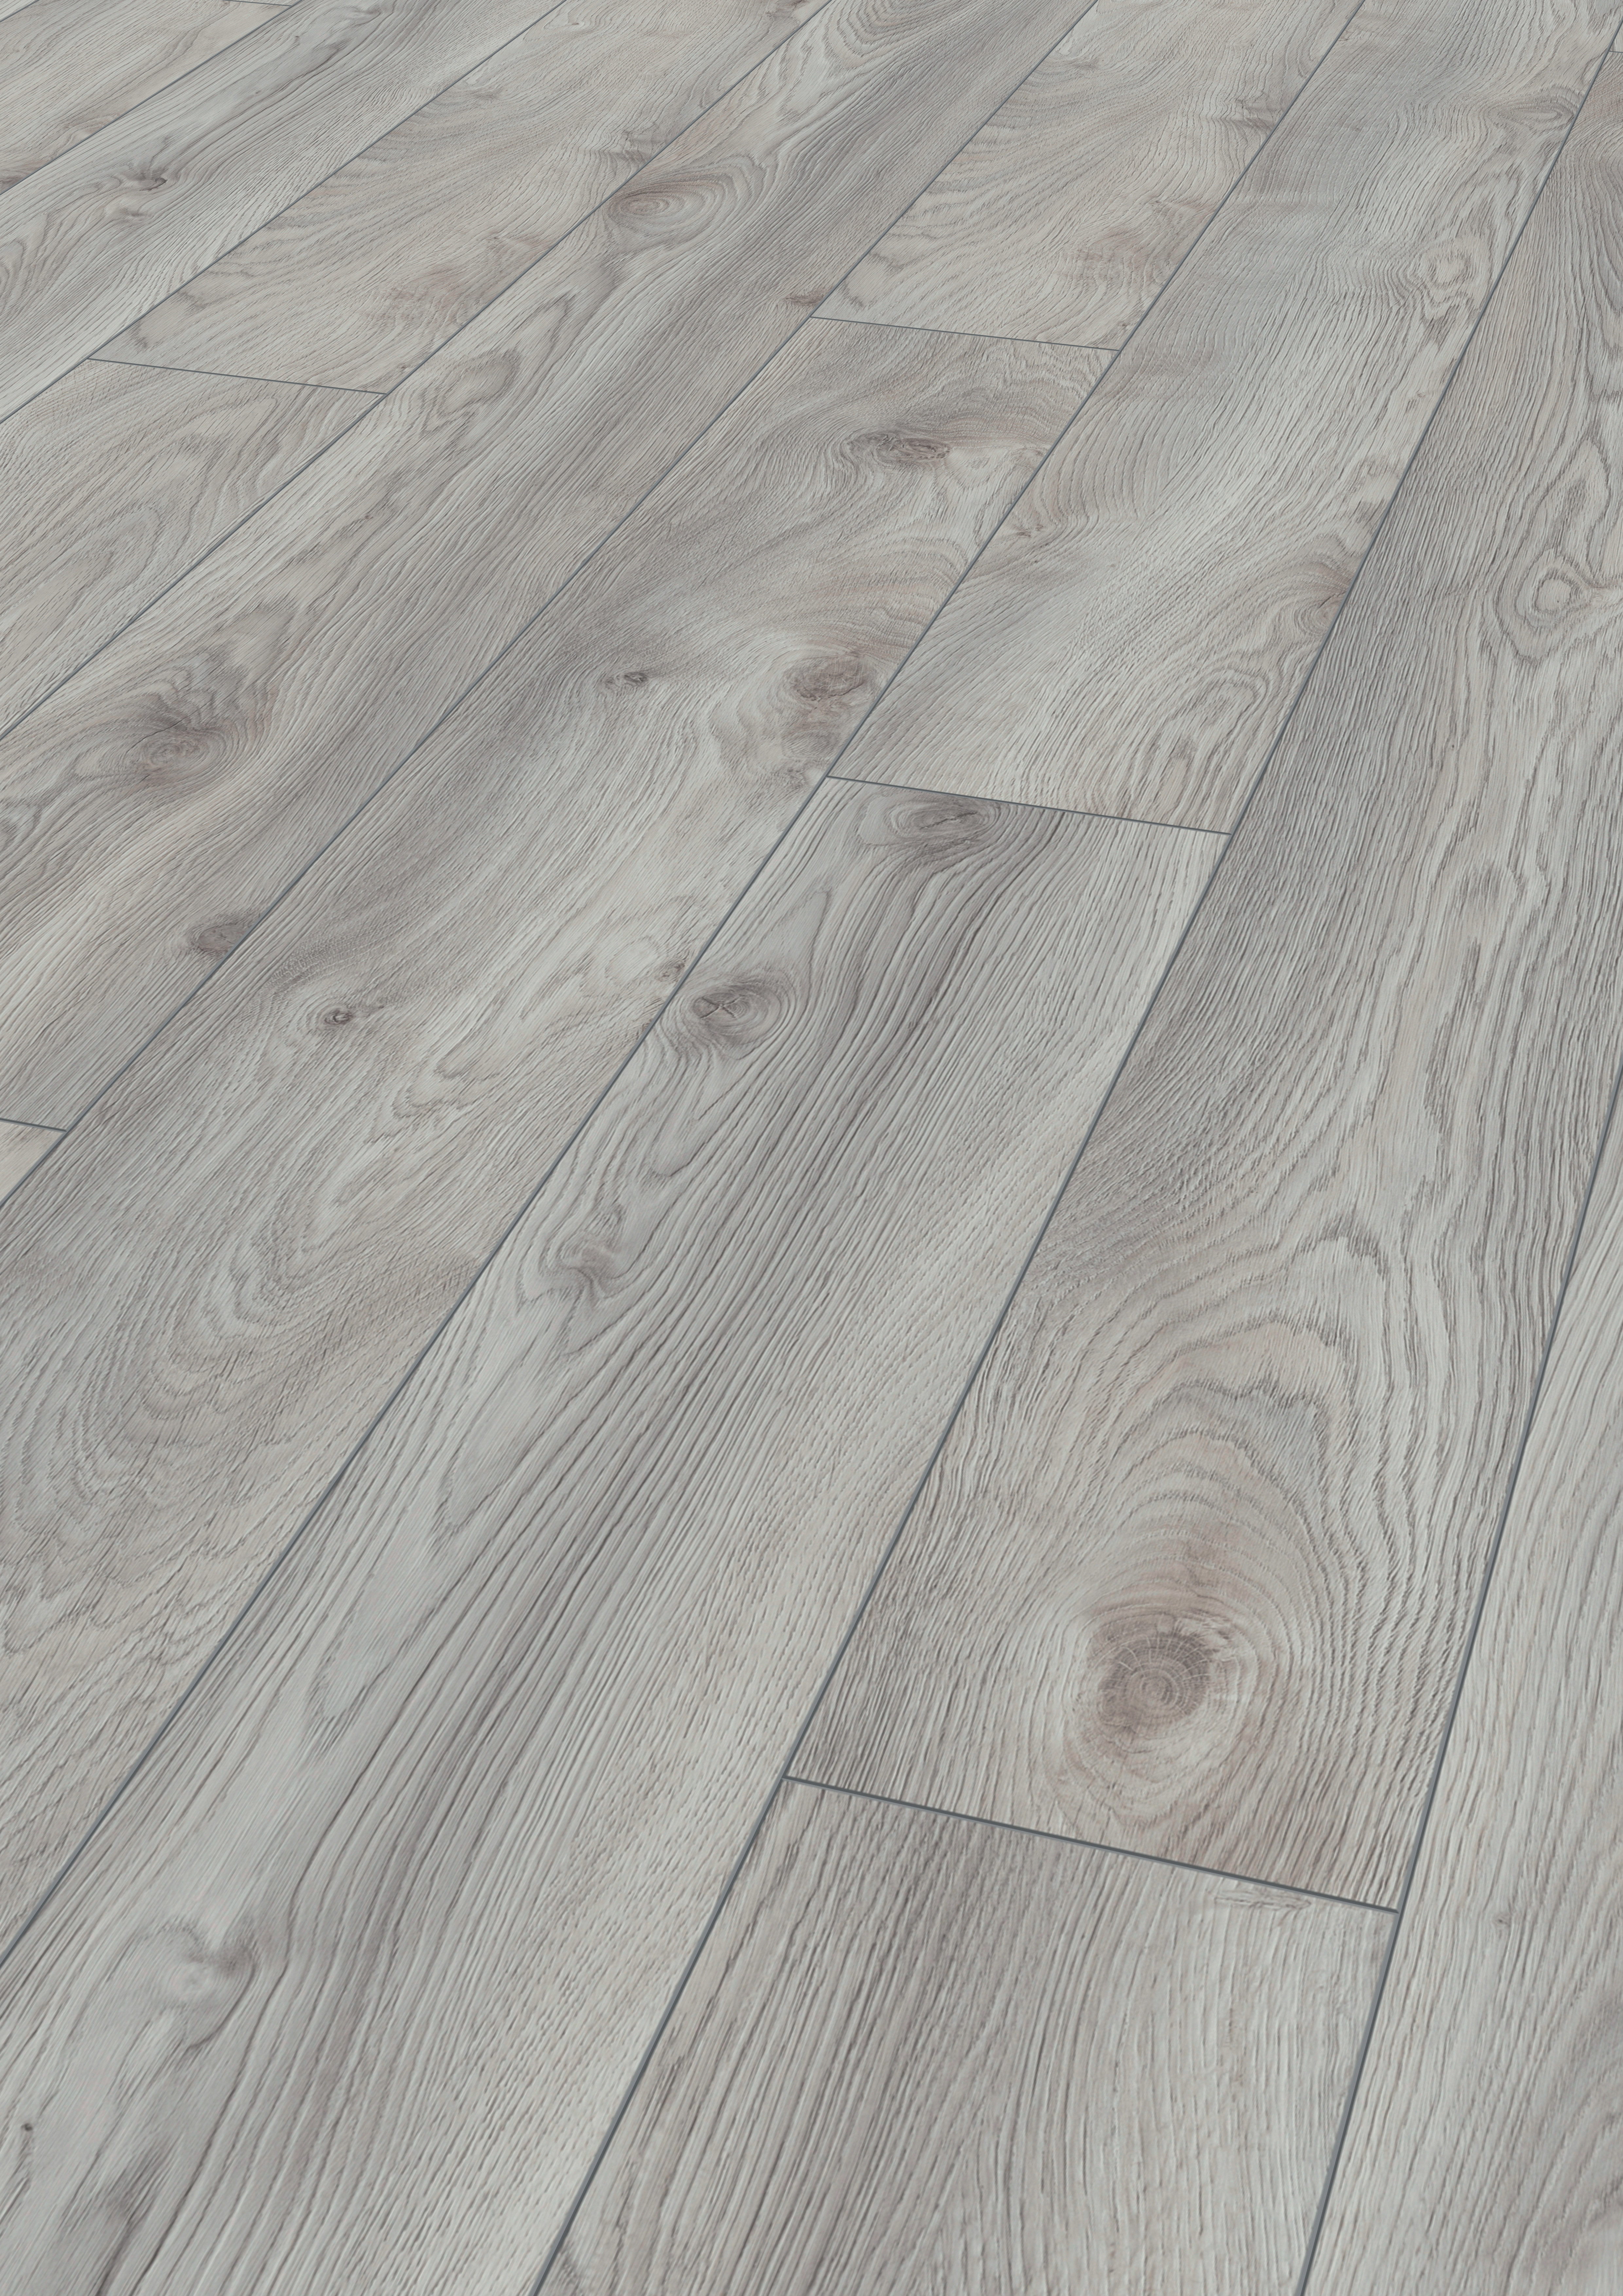 22 Amazing Benefits Of Hardwood Flooring Vs Laminate 2023 free download benefits of hardwood flooring vs laminate of mammut laminate flooring in country house plank style kronotex with regard to download picture amp